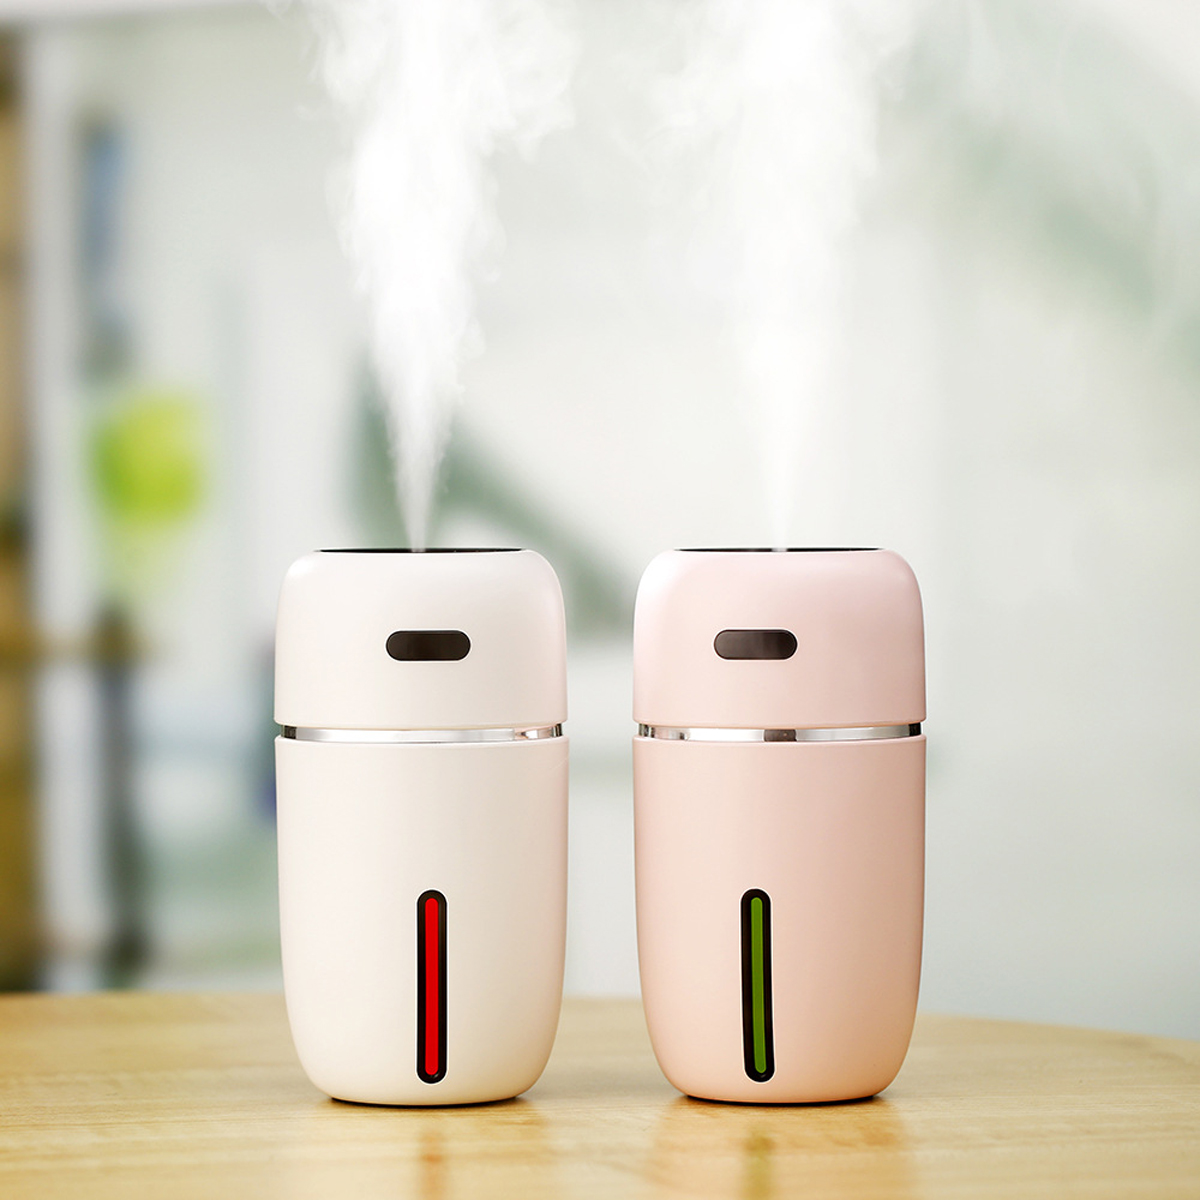 200ml-Electric-Air-Humidifier-Diffuser-Aroma-Mist-Purifier-LED-Light-USB-Charging-Power-Bank-for-Por-1809965-6